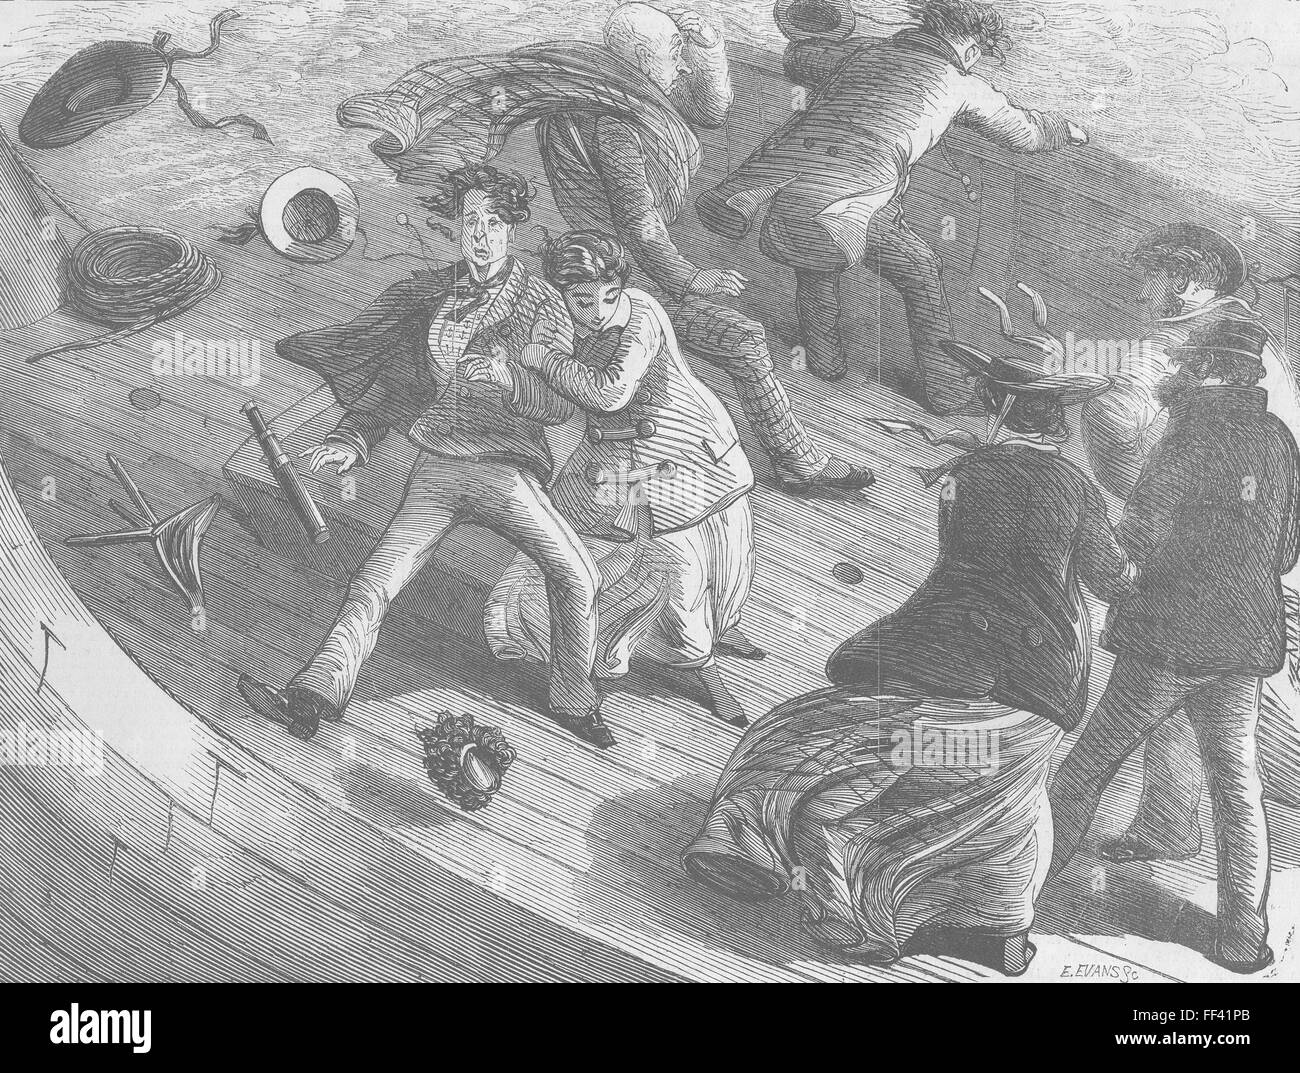 SAILING The pleasures of yachting 1856. Illustrated London News Stock Photo